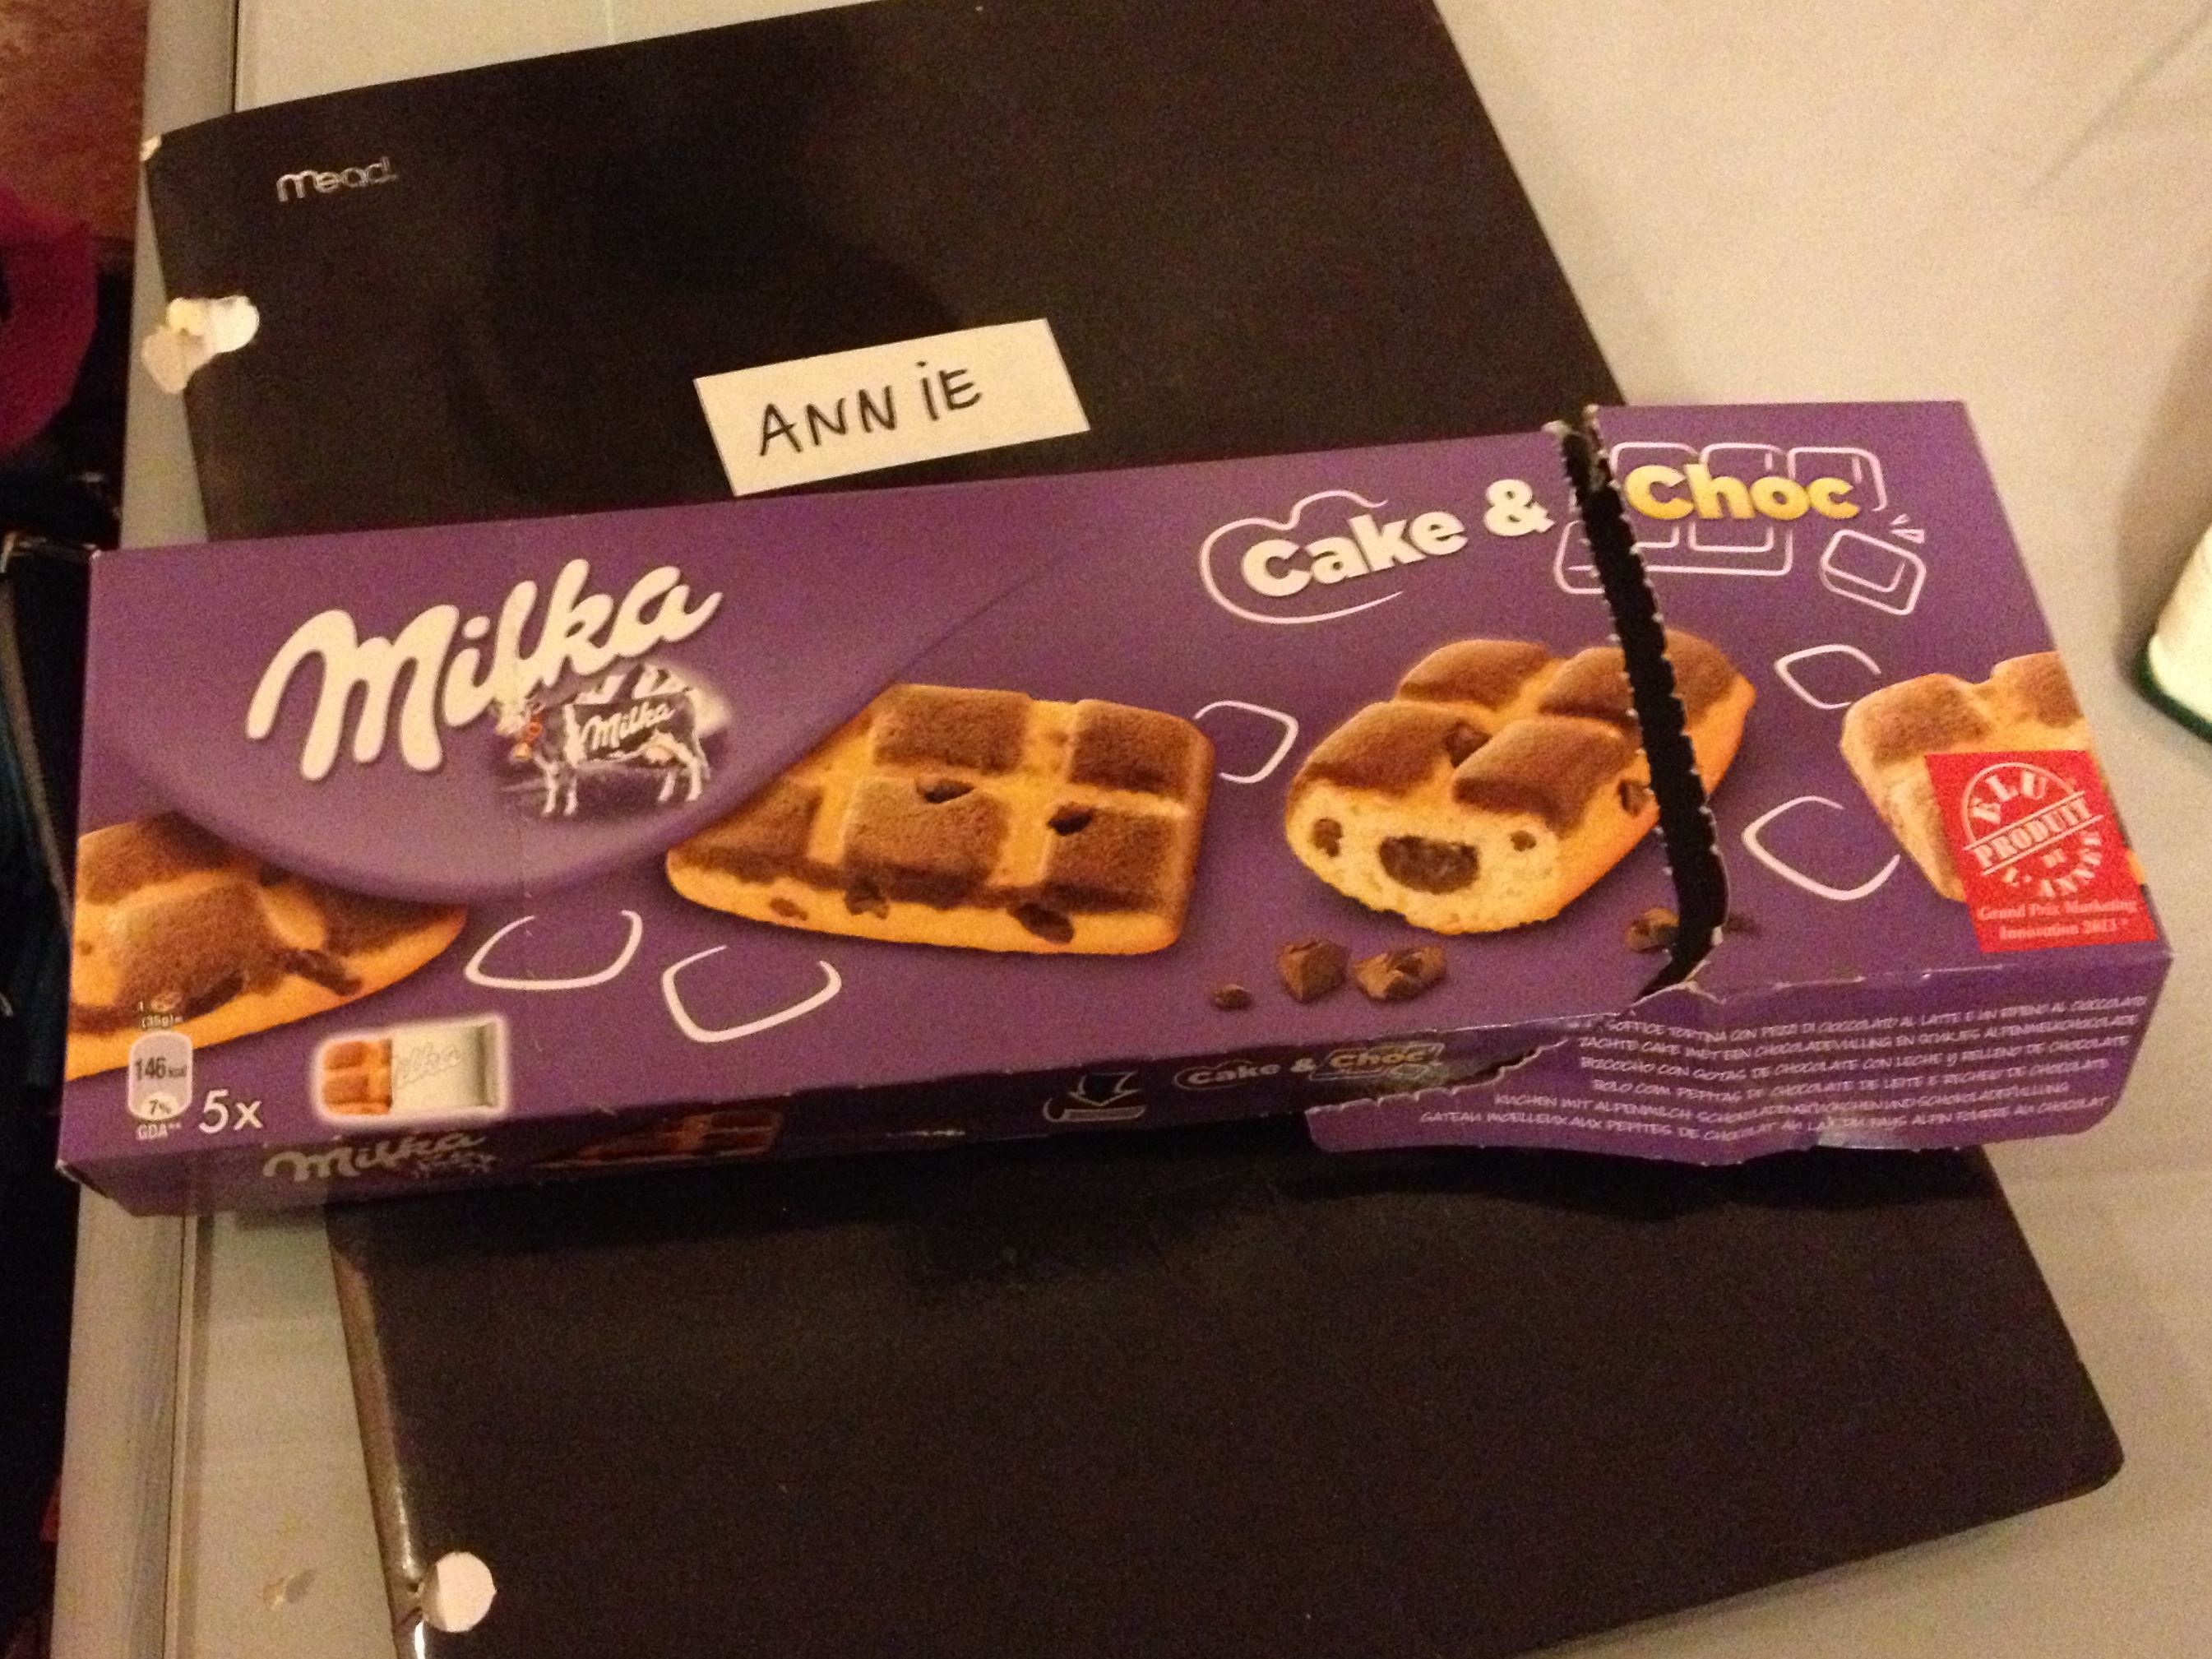 Milka Cake & Choc, a delightful prepackaged treat great for travel writers on the go!